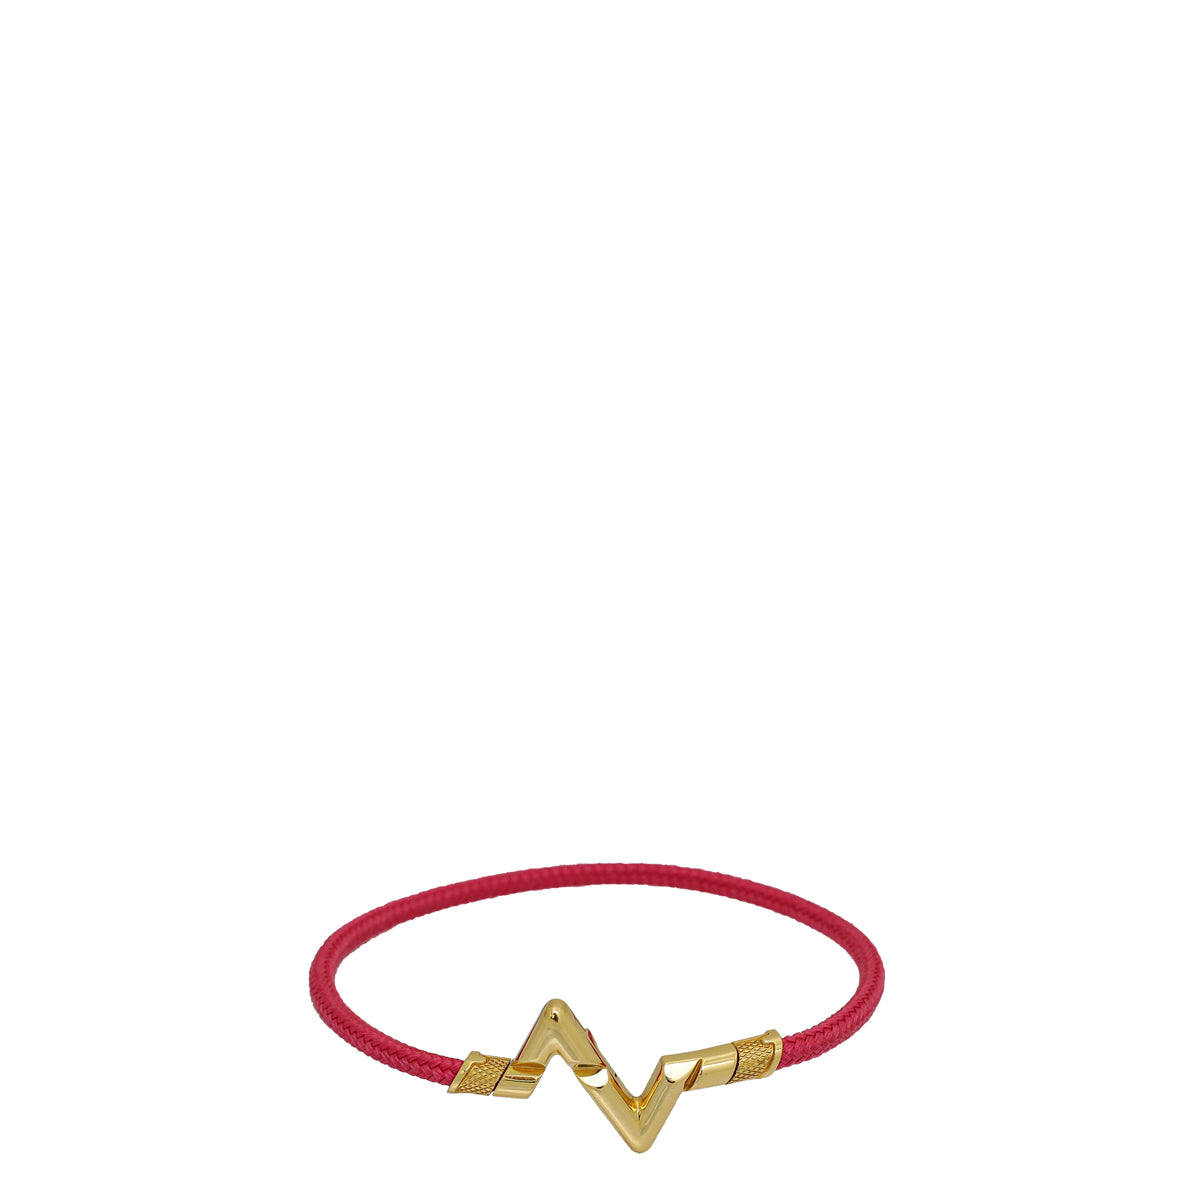 LV Volt Upside Down Play Large Bracelet, Yellow Gold - Jewelry